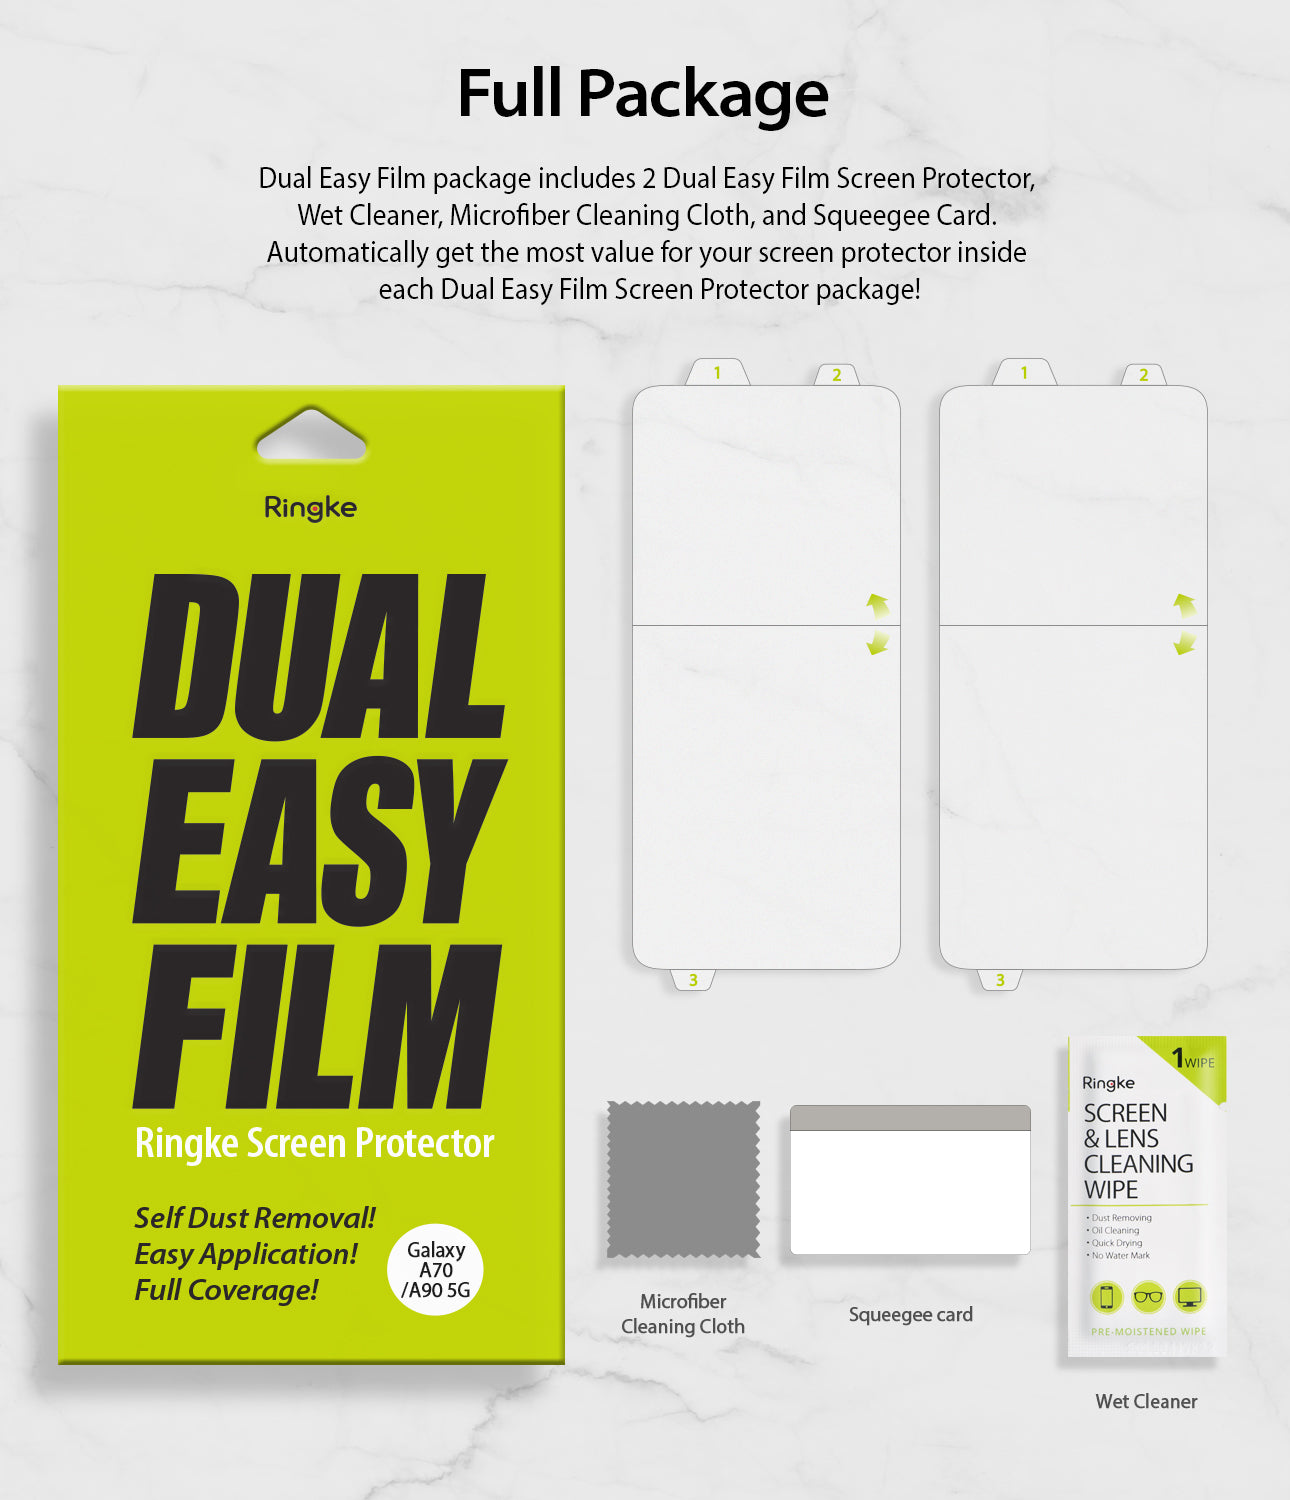 full package include 2 dual easy films, wipe, squeegee card, microfiber cleaning cloth